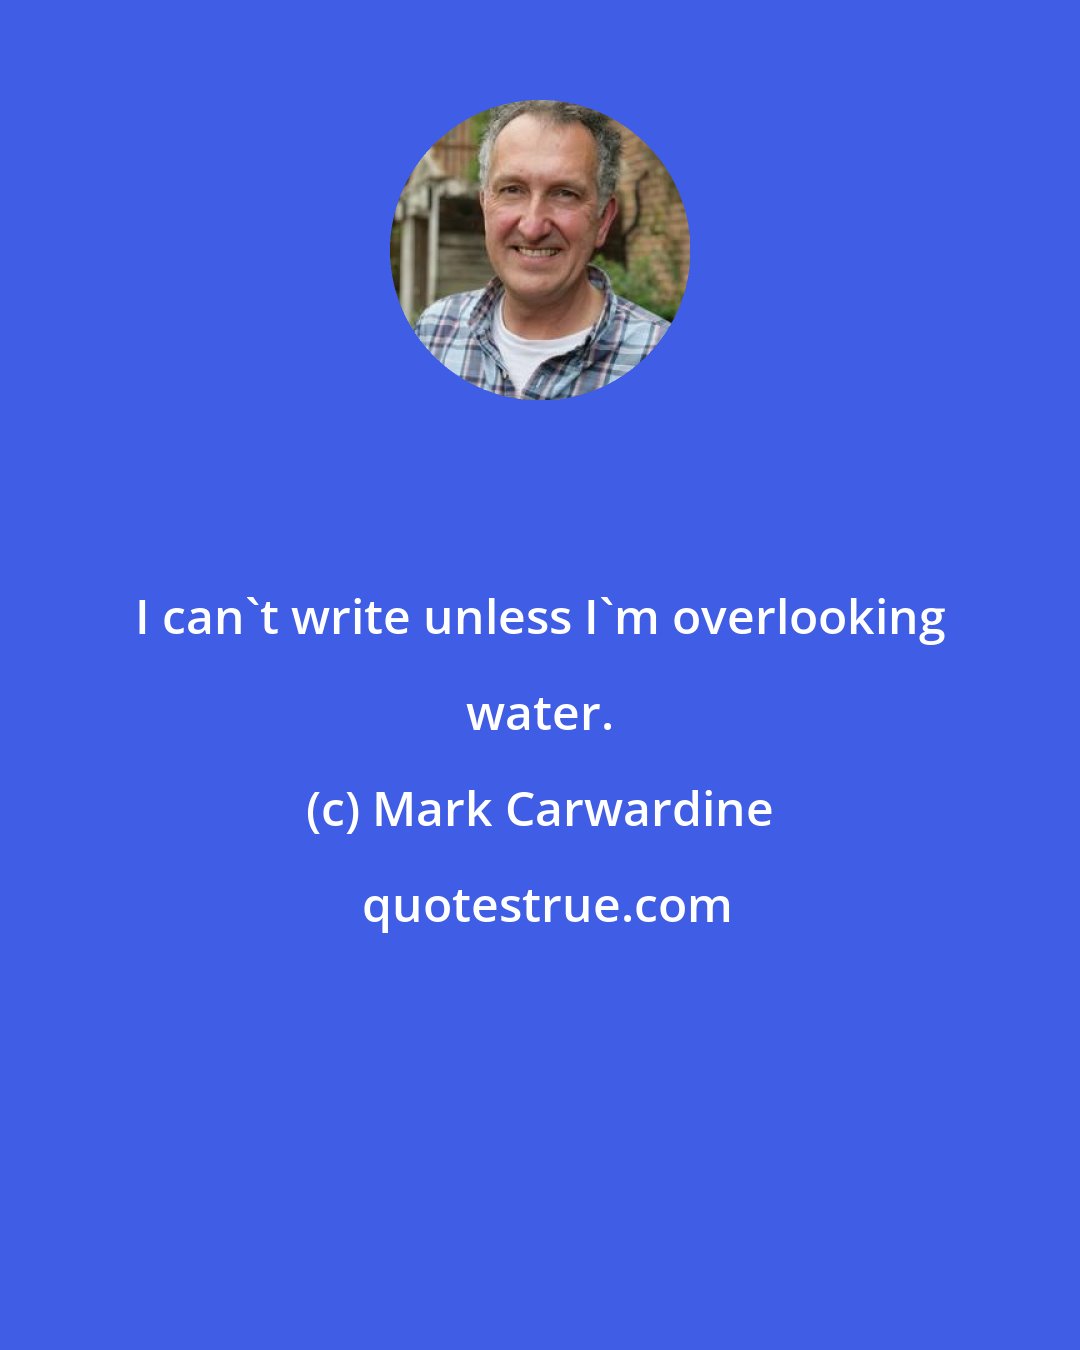 Mark Carwardine: I can't write unless I'm overlooking water.